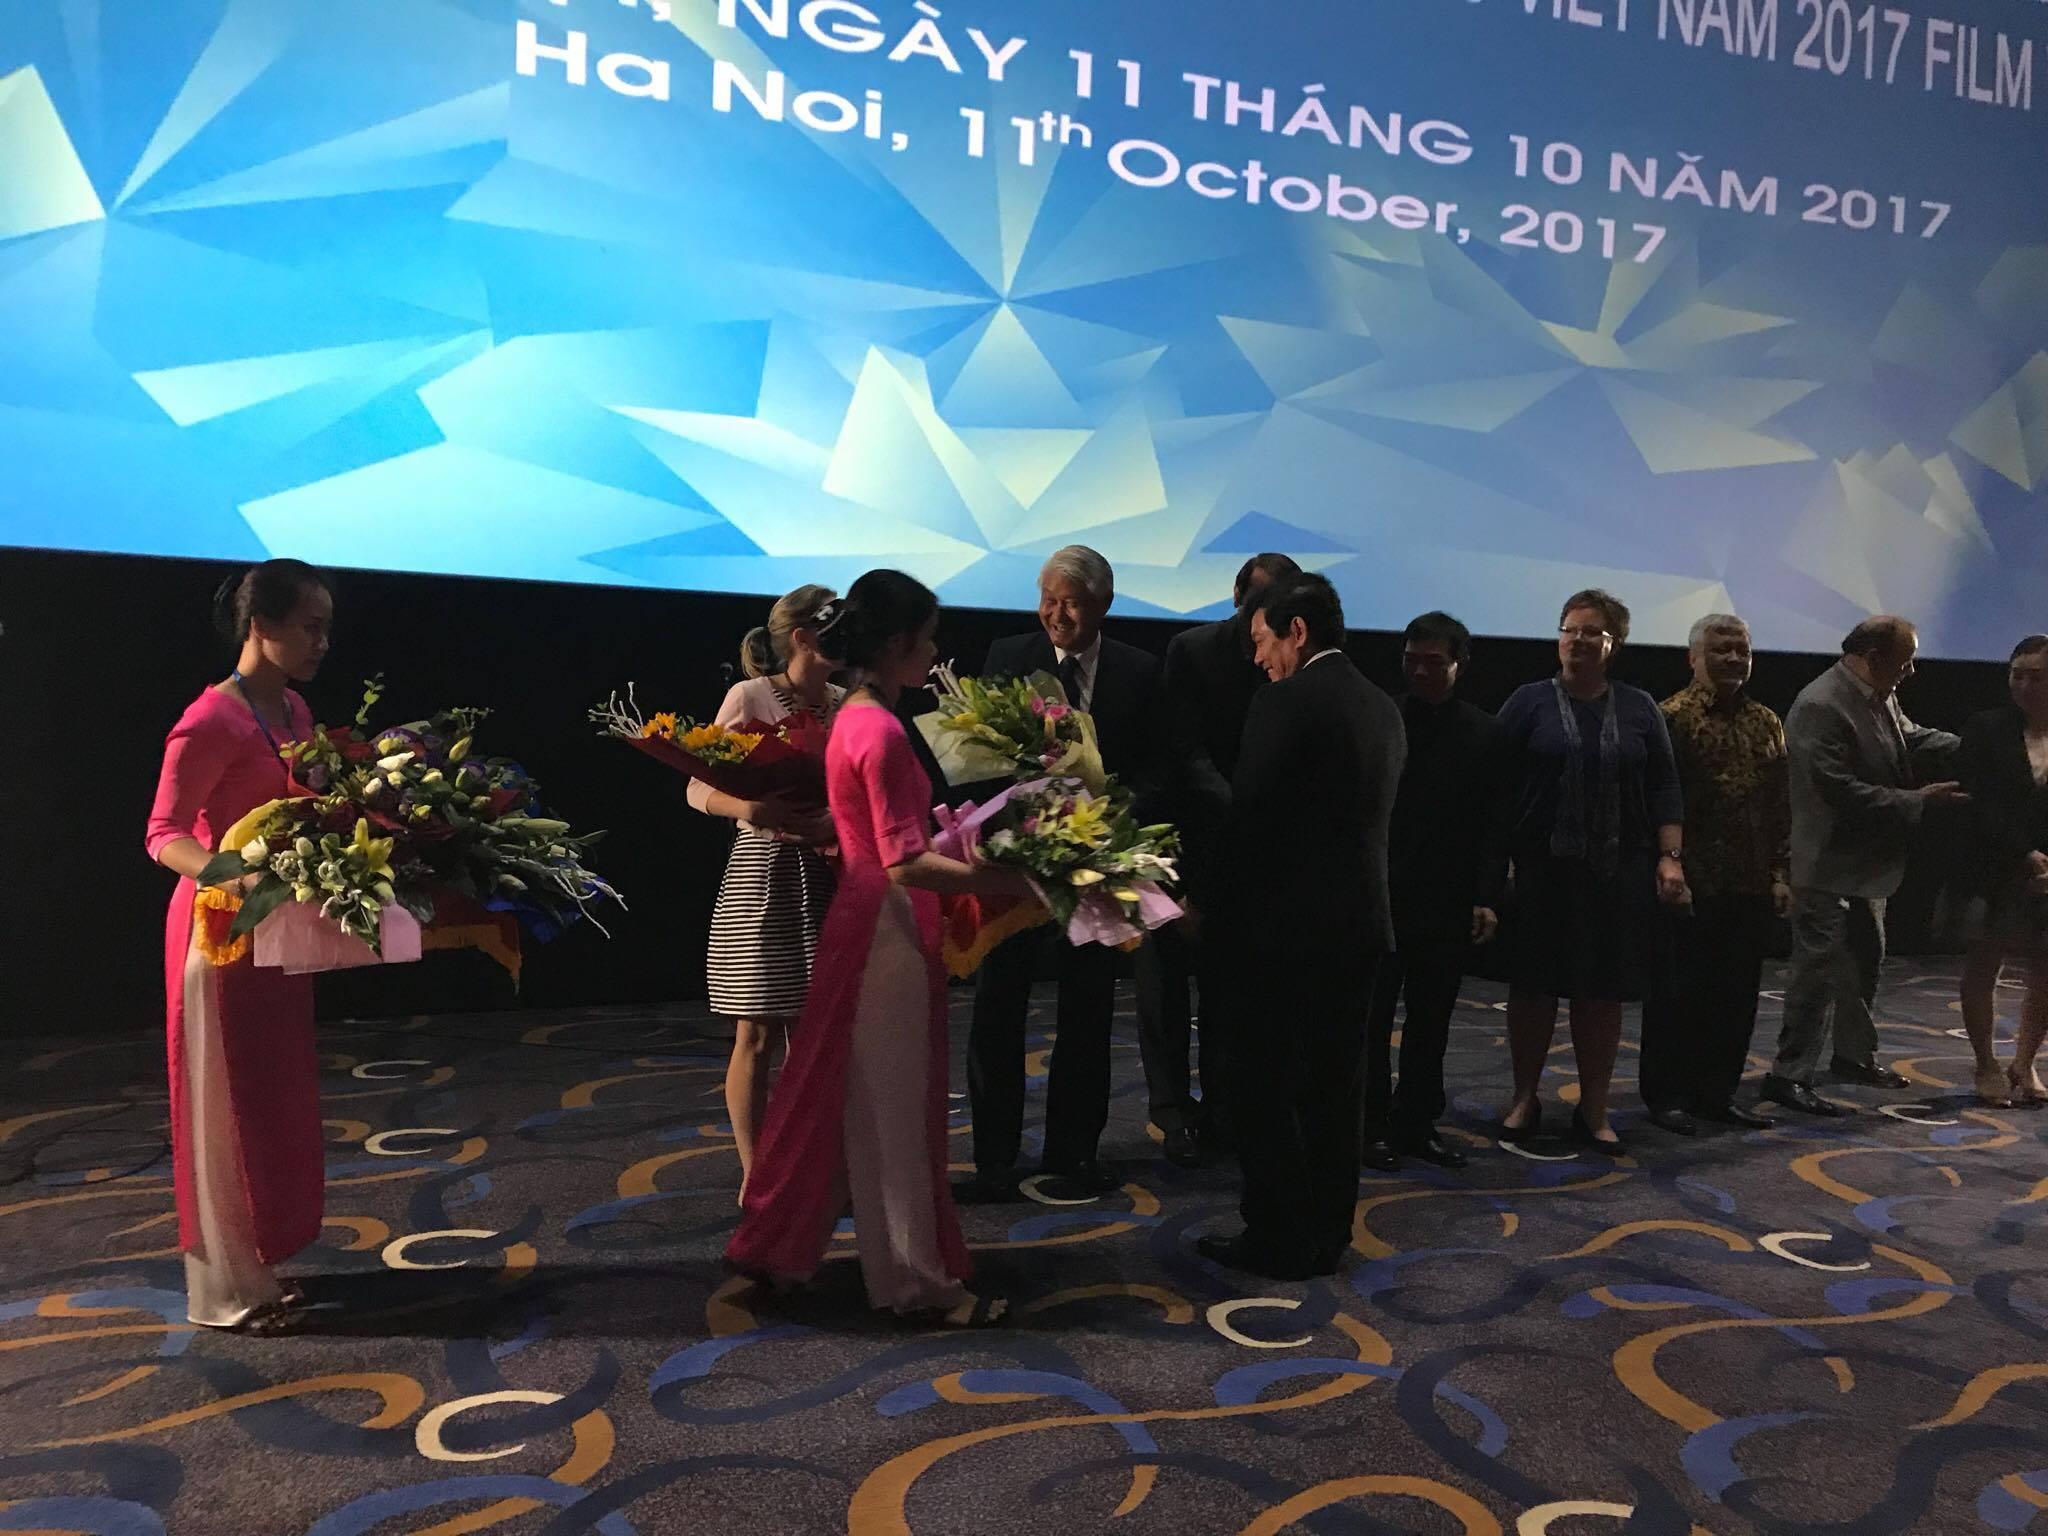 Mr Huynh Vinh Ai, Deputy Minister for Culture, Sports and Tourism of Vietnam, presented flowers to Amb. Richard SHIH extending the Government of Vietnam's appreciation for Chinese Taipei's contribution in the event of APEC Vietnam 2017 Film Week.